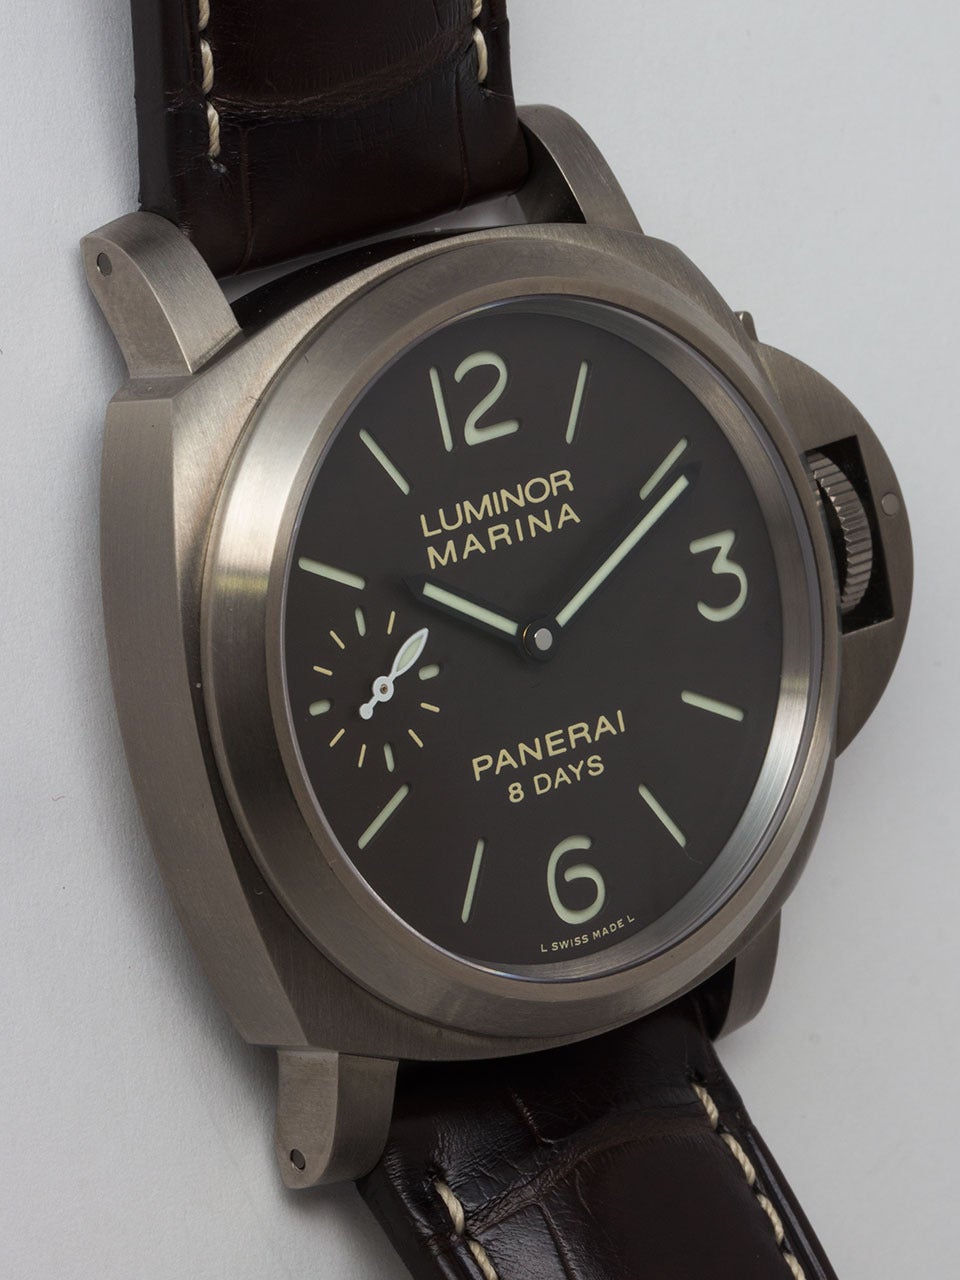 Panerai Titanium Luminor Marina 8 Day Power Reserve Wristwatch PAM 056. Like new condition, pre owned complete with box and papers circa 2013. 44mm diameter case, brown sandwich dial with luminova figures and hands. Sapphire crystal display back